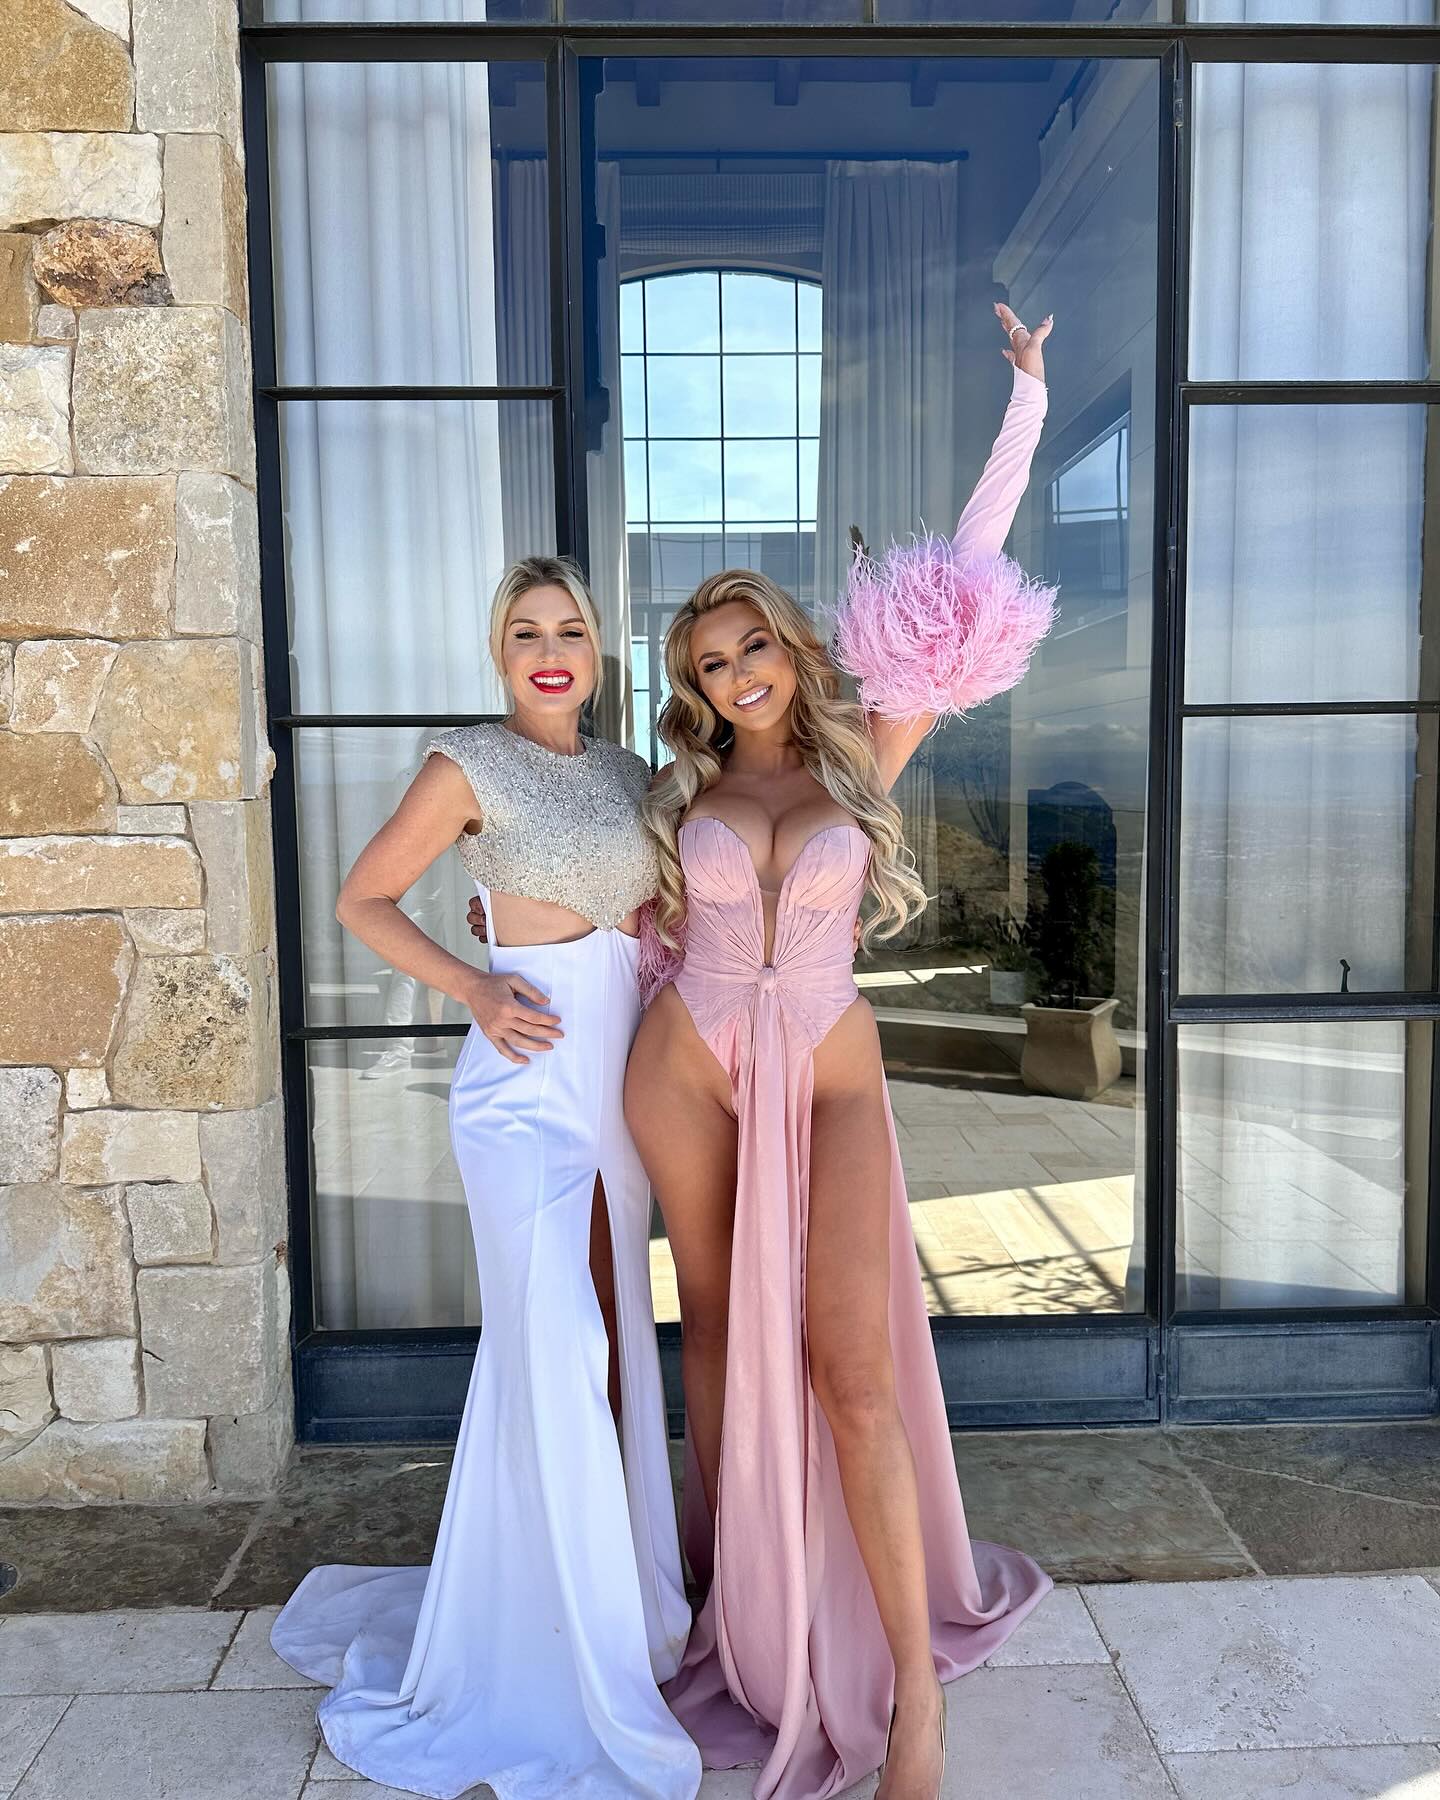 Happy bday to my sister from another mister @khloe 🎂🥳🥂🥳
You’ve done more in your short life than most people do in lifetimes. I can’t wait for our adventures around the globe to continue! This birthday is even more special with the arrival of Ocean Rose! May you stay blessed and continue to conquer all your dreams!! #happybirthday #loveyou ❤️❤️